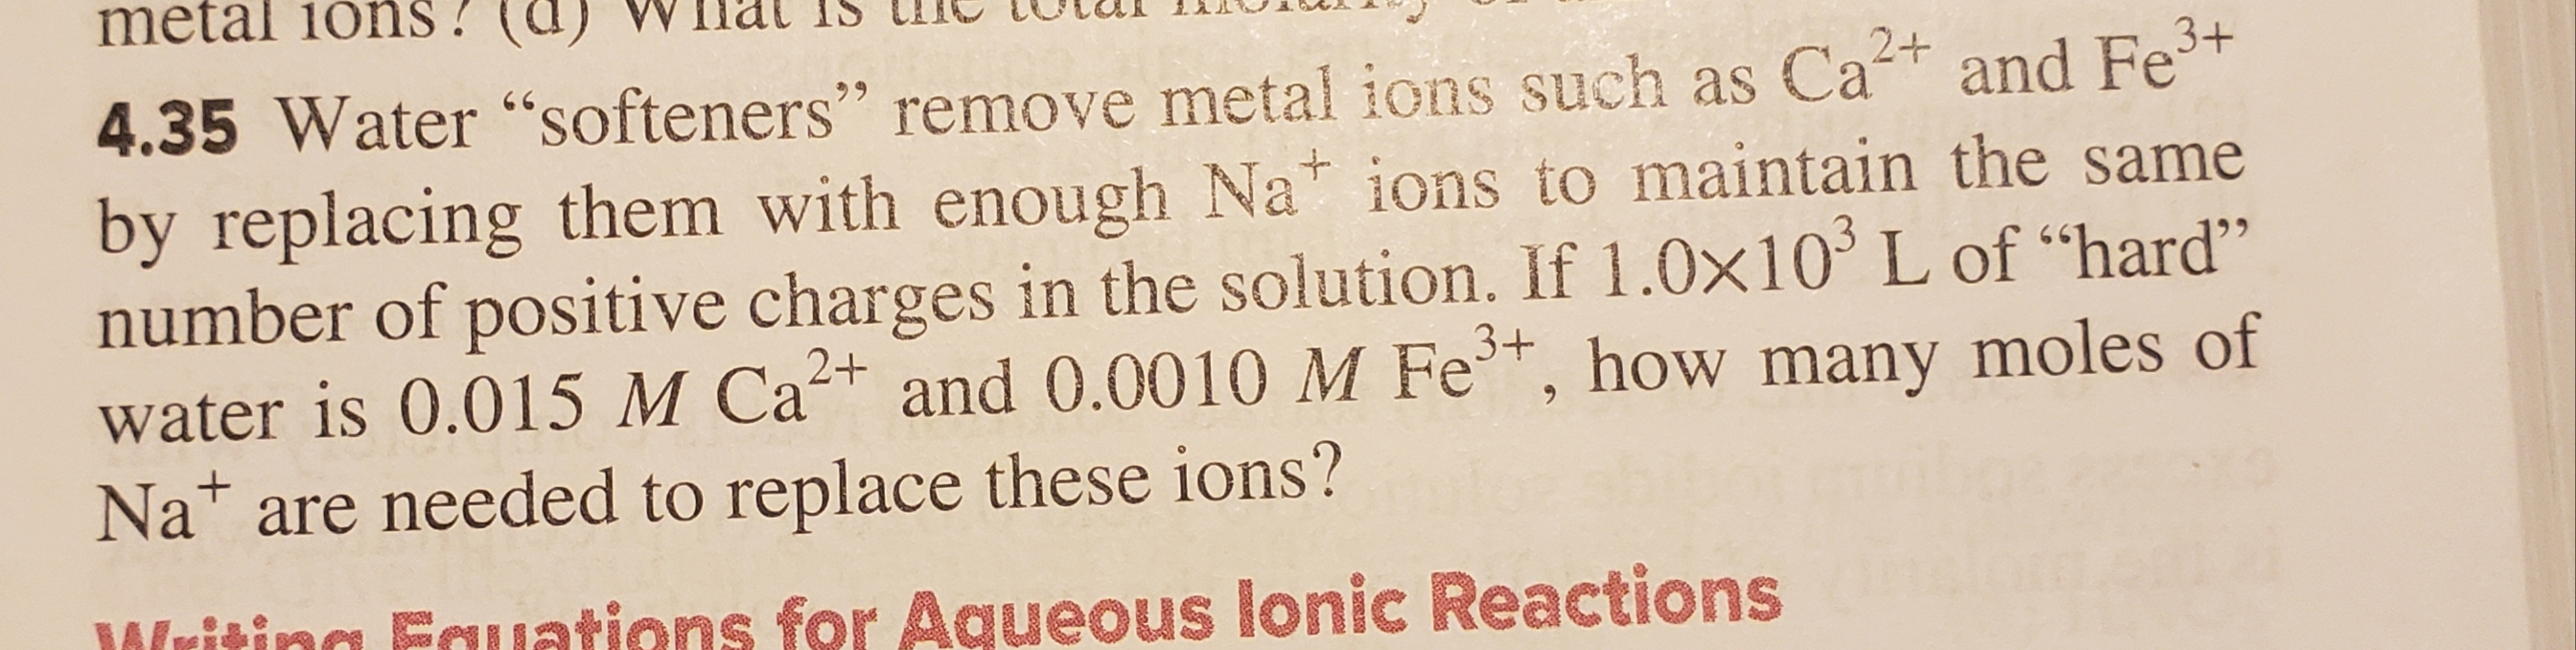 metal ions!
3+
2+
4.35 Water "softeners" remove metal ions such as Caand Fe
by replacing them with enough Na ions to maintain the same
number of positive charges in the solution. If 1.0x10 L of "hard"
water is 0.015 M Ca and 0.0010 M Fe, how many moles of
Na are needed to replace these ions?
9
3+
Wising Ecuations for Aqueous lonic Reactions
